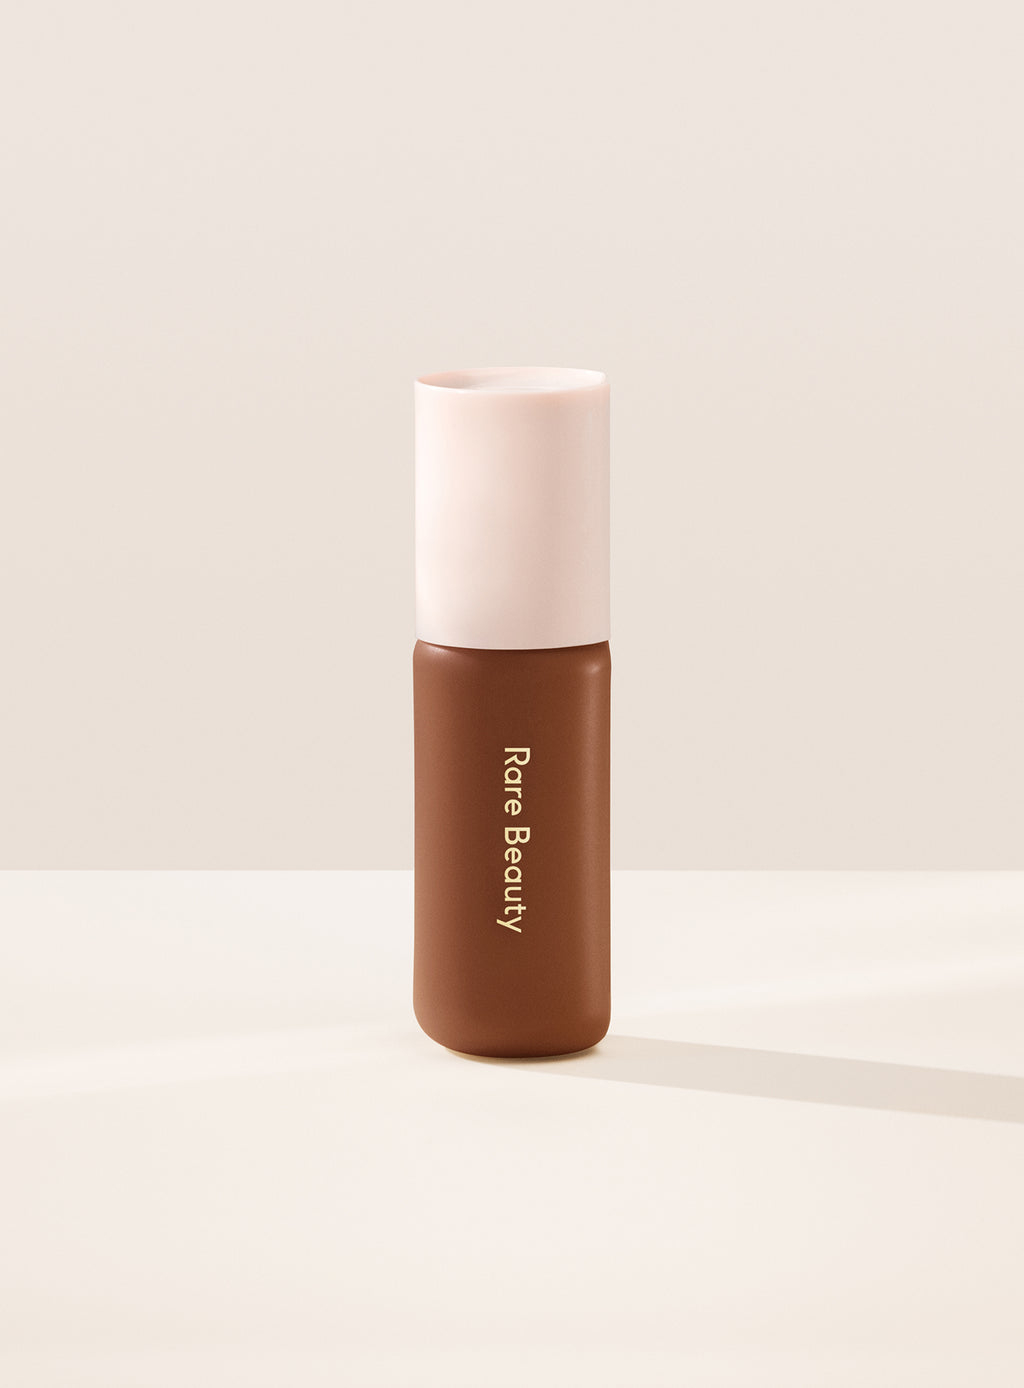 Rare Beauty's Liquid Touch Weightless Foundation Gave Me Filtered